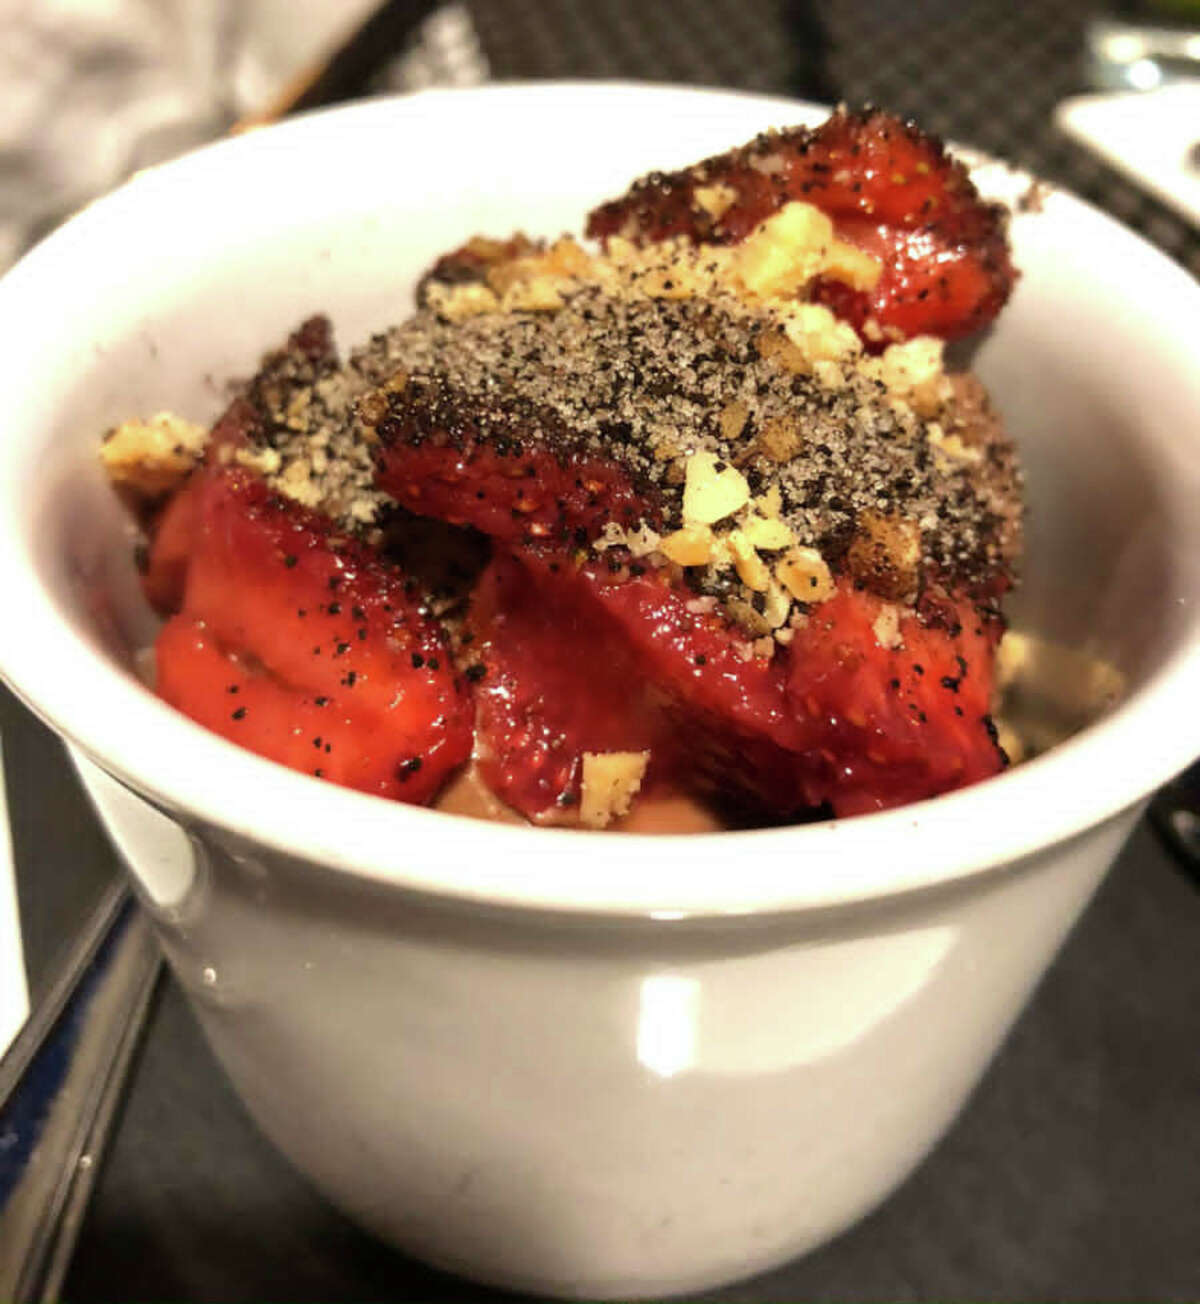 Nutella mousse topped with strawberries and crushed cookies at Radici Kitchen & Bar.